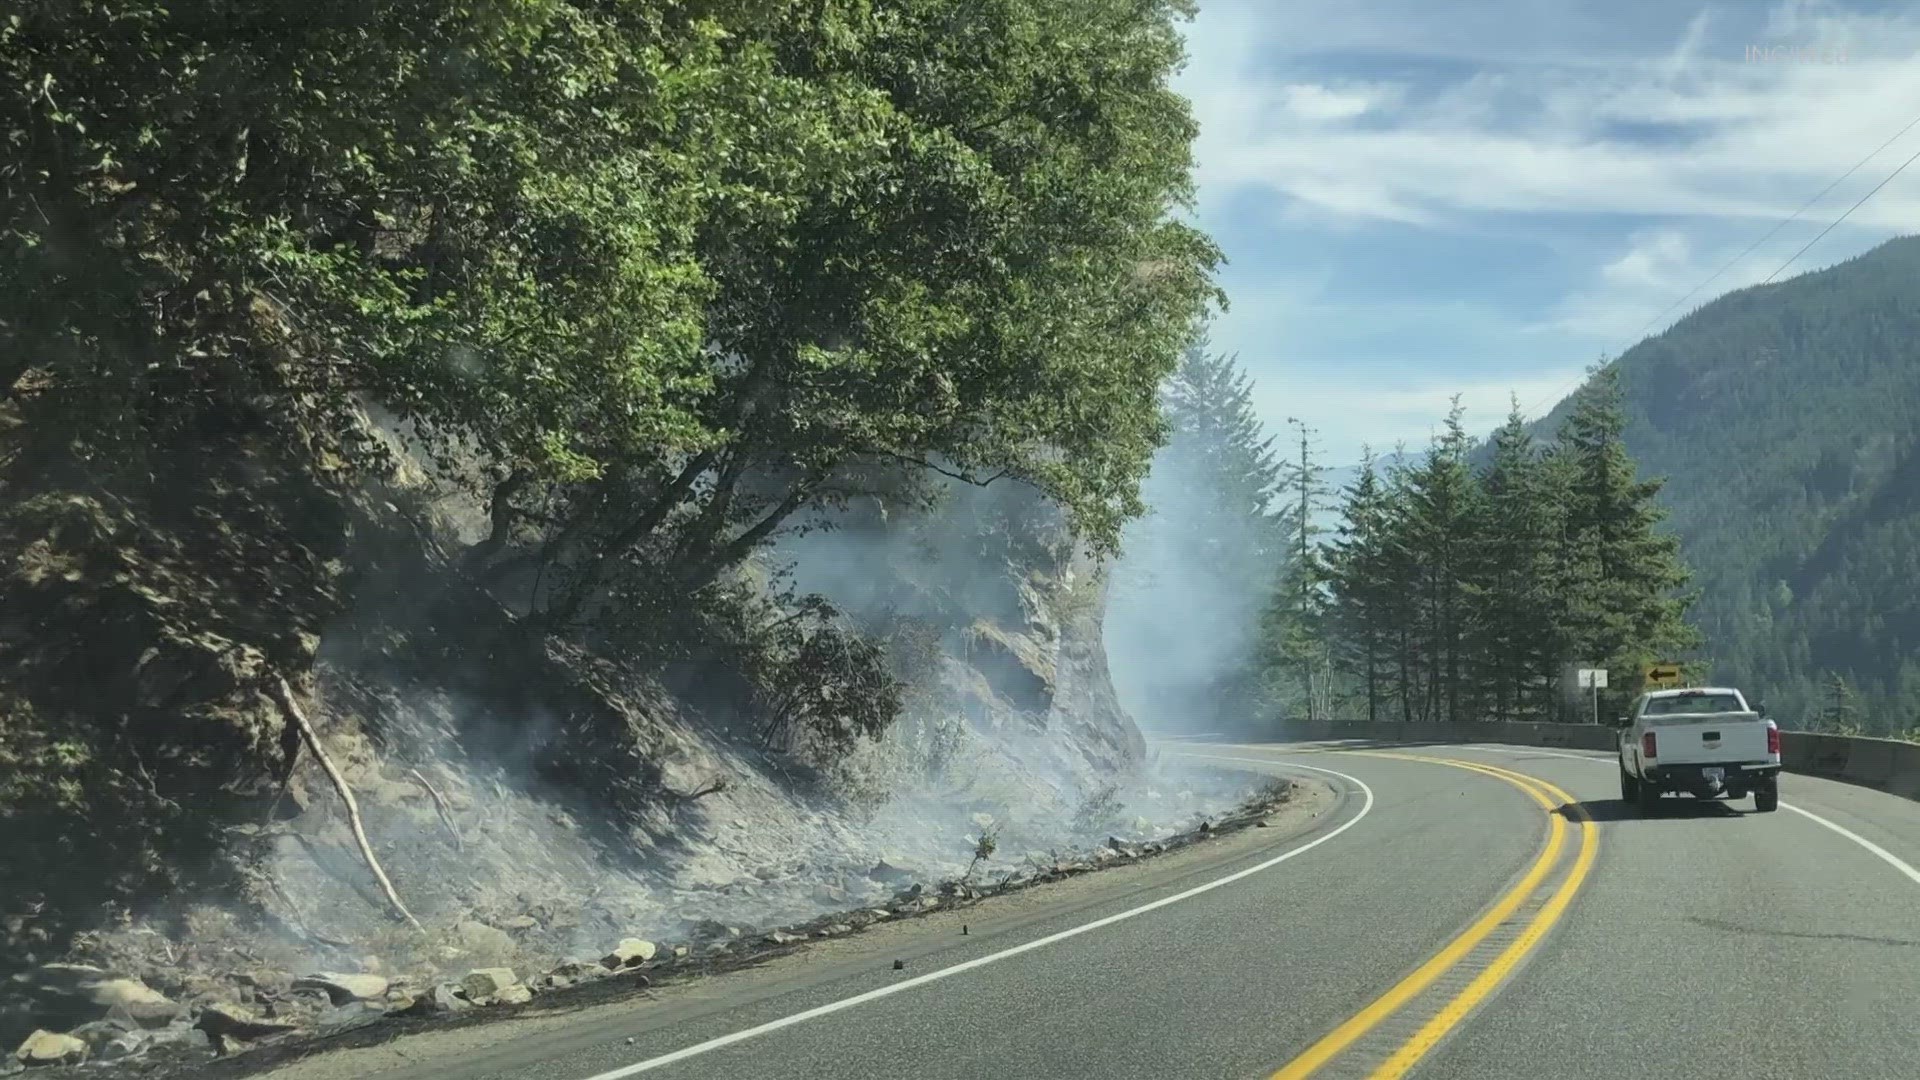 Cars will be able to travel between Newhalem and the Silver Star campground, although WSDOT cautioned the road could close again if fire conditions worsen.